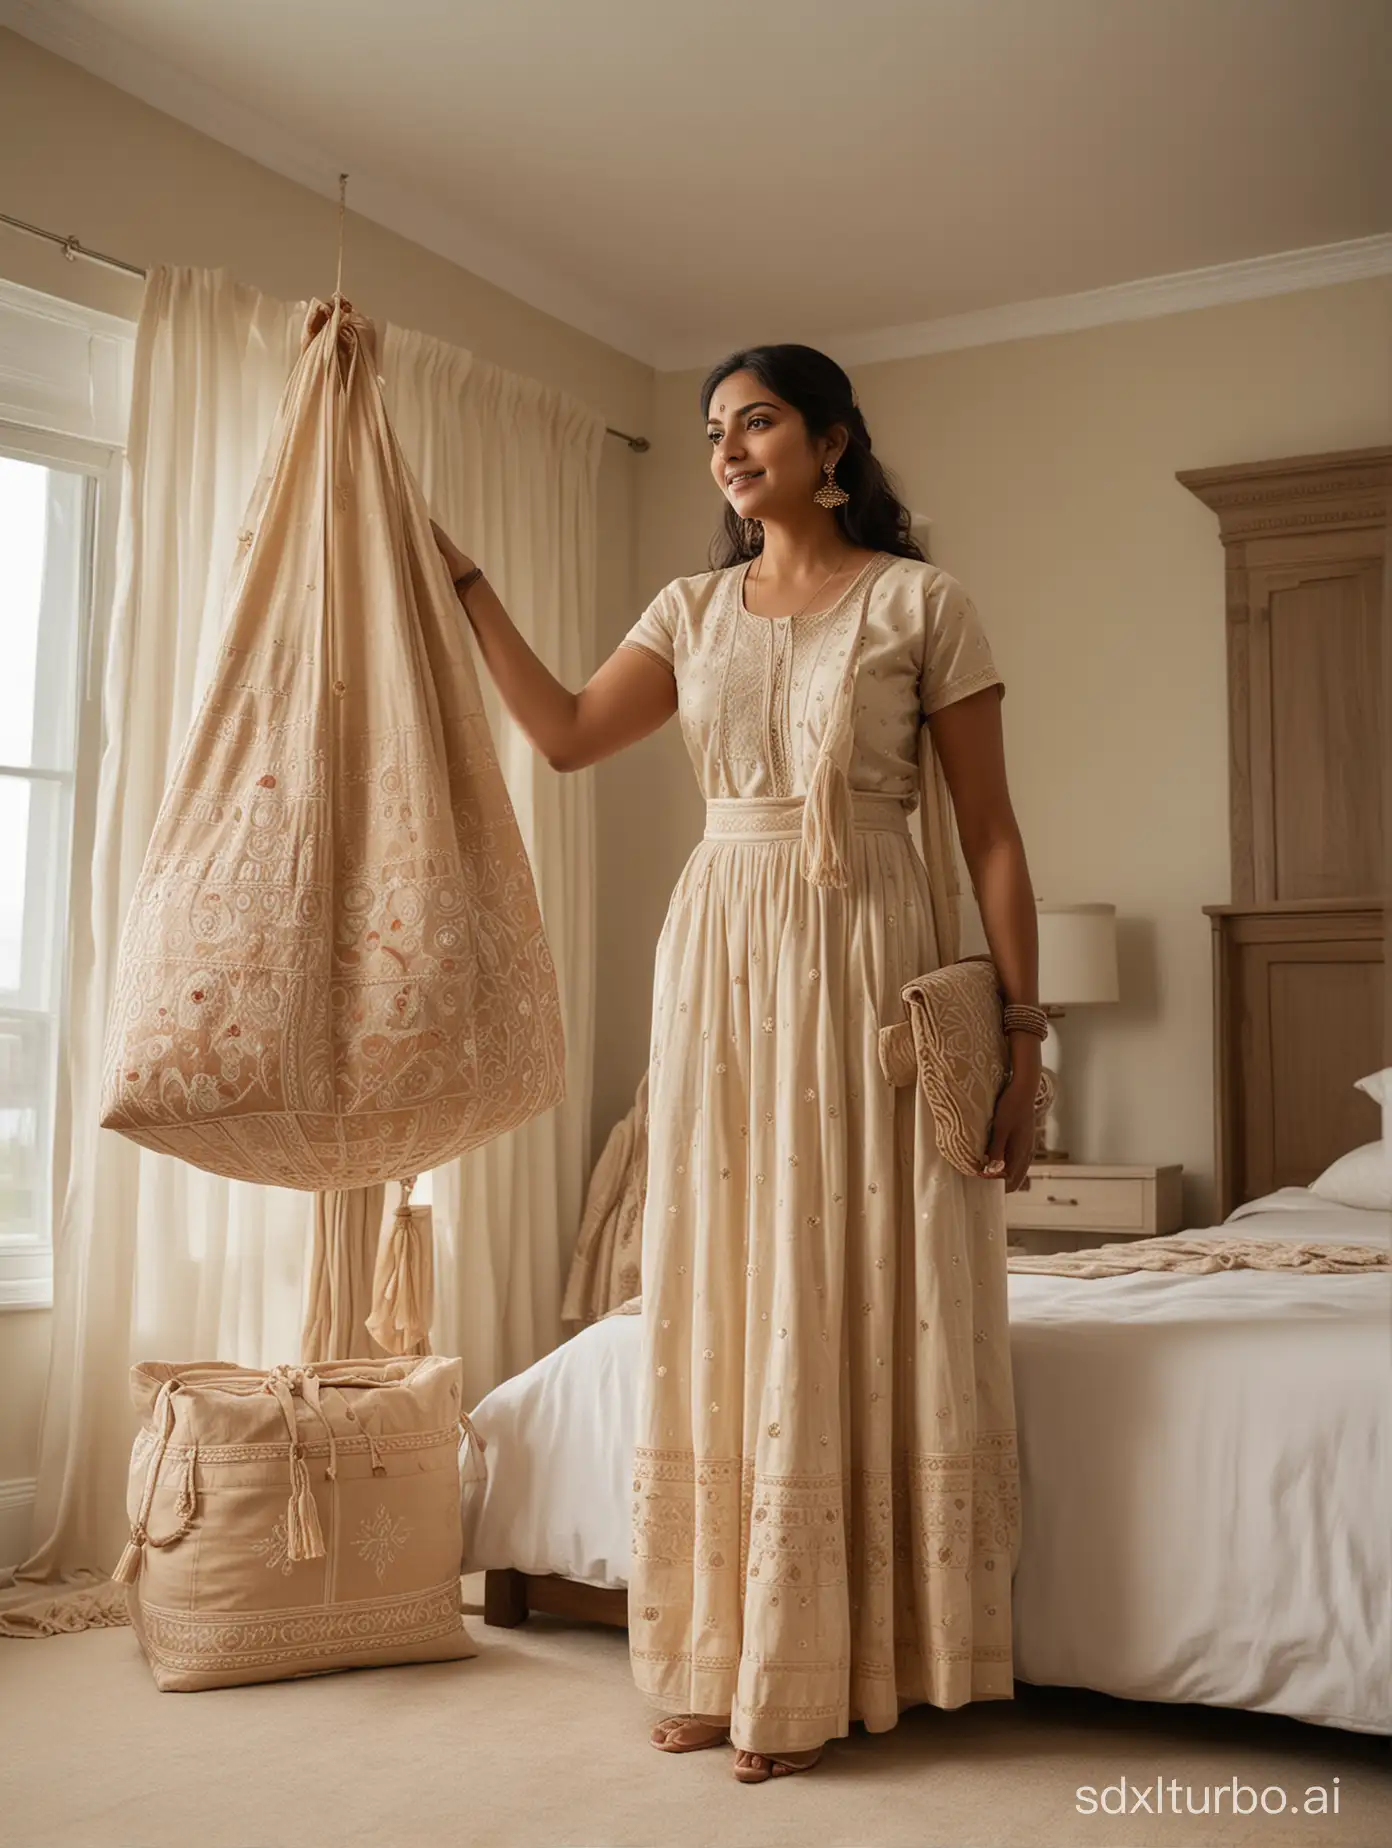 Indian woman in neutral embroidered partywear standing next to bed in her bedroom which is furnished in traditional Indian style, she is holding a Hayden Hill long hanging storage bag, room brightly lit, emulate Nikon D6 shot, wide angle shot, soft warm lighting, photorealistic